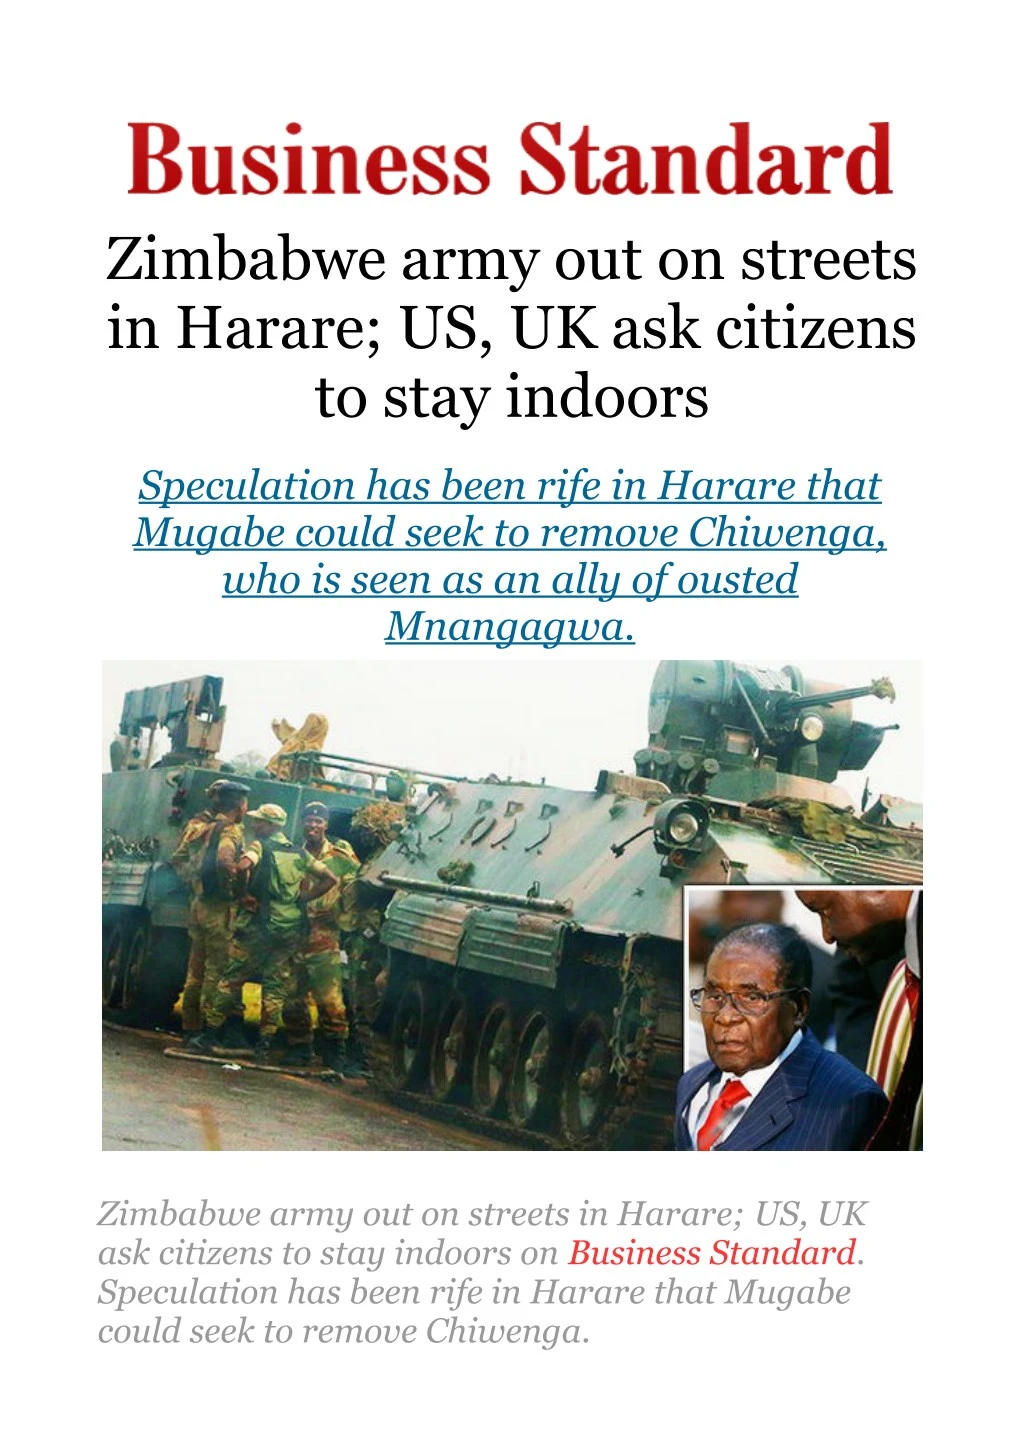 zimbabwe army out on streets in harare